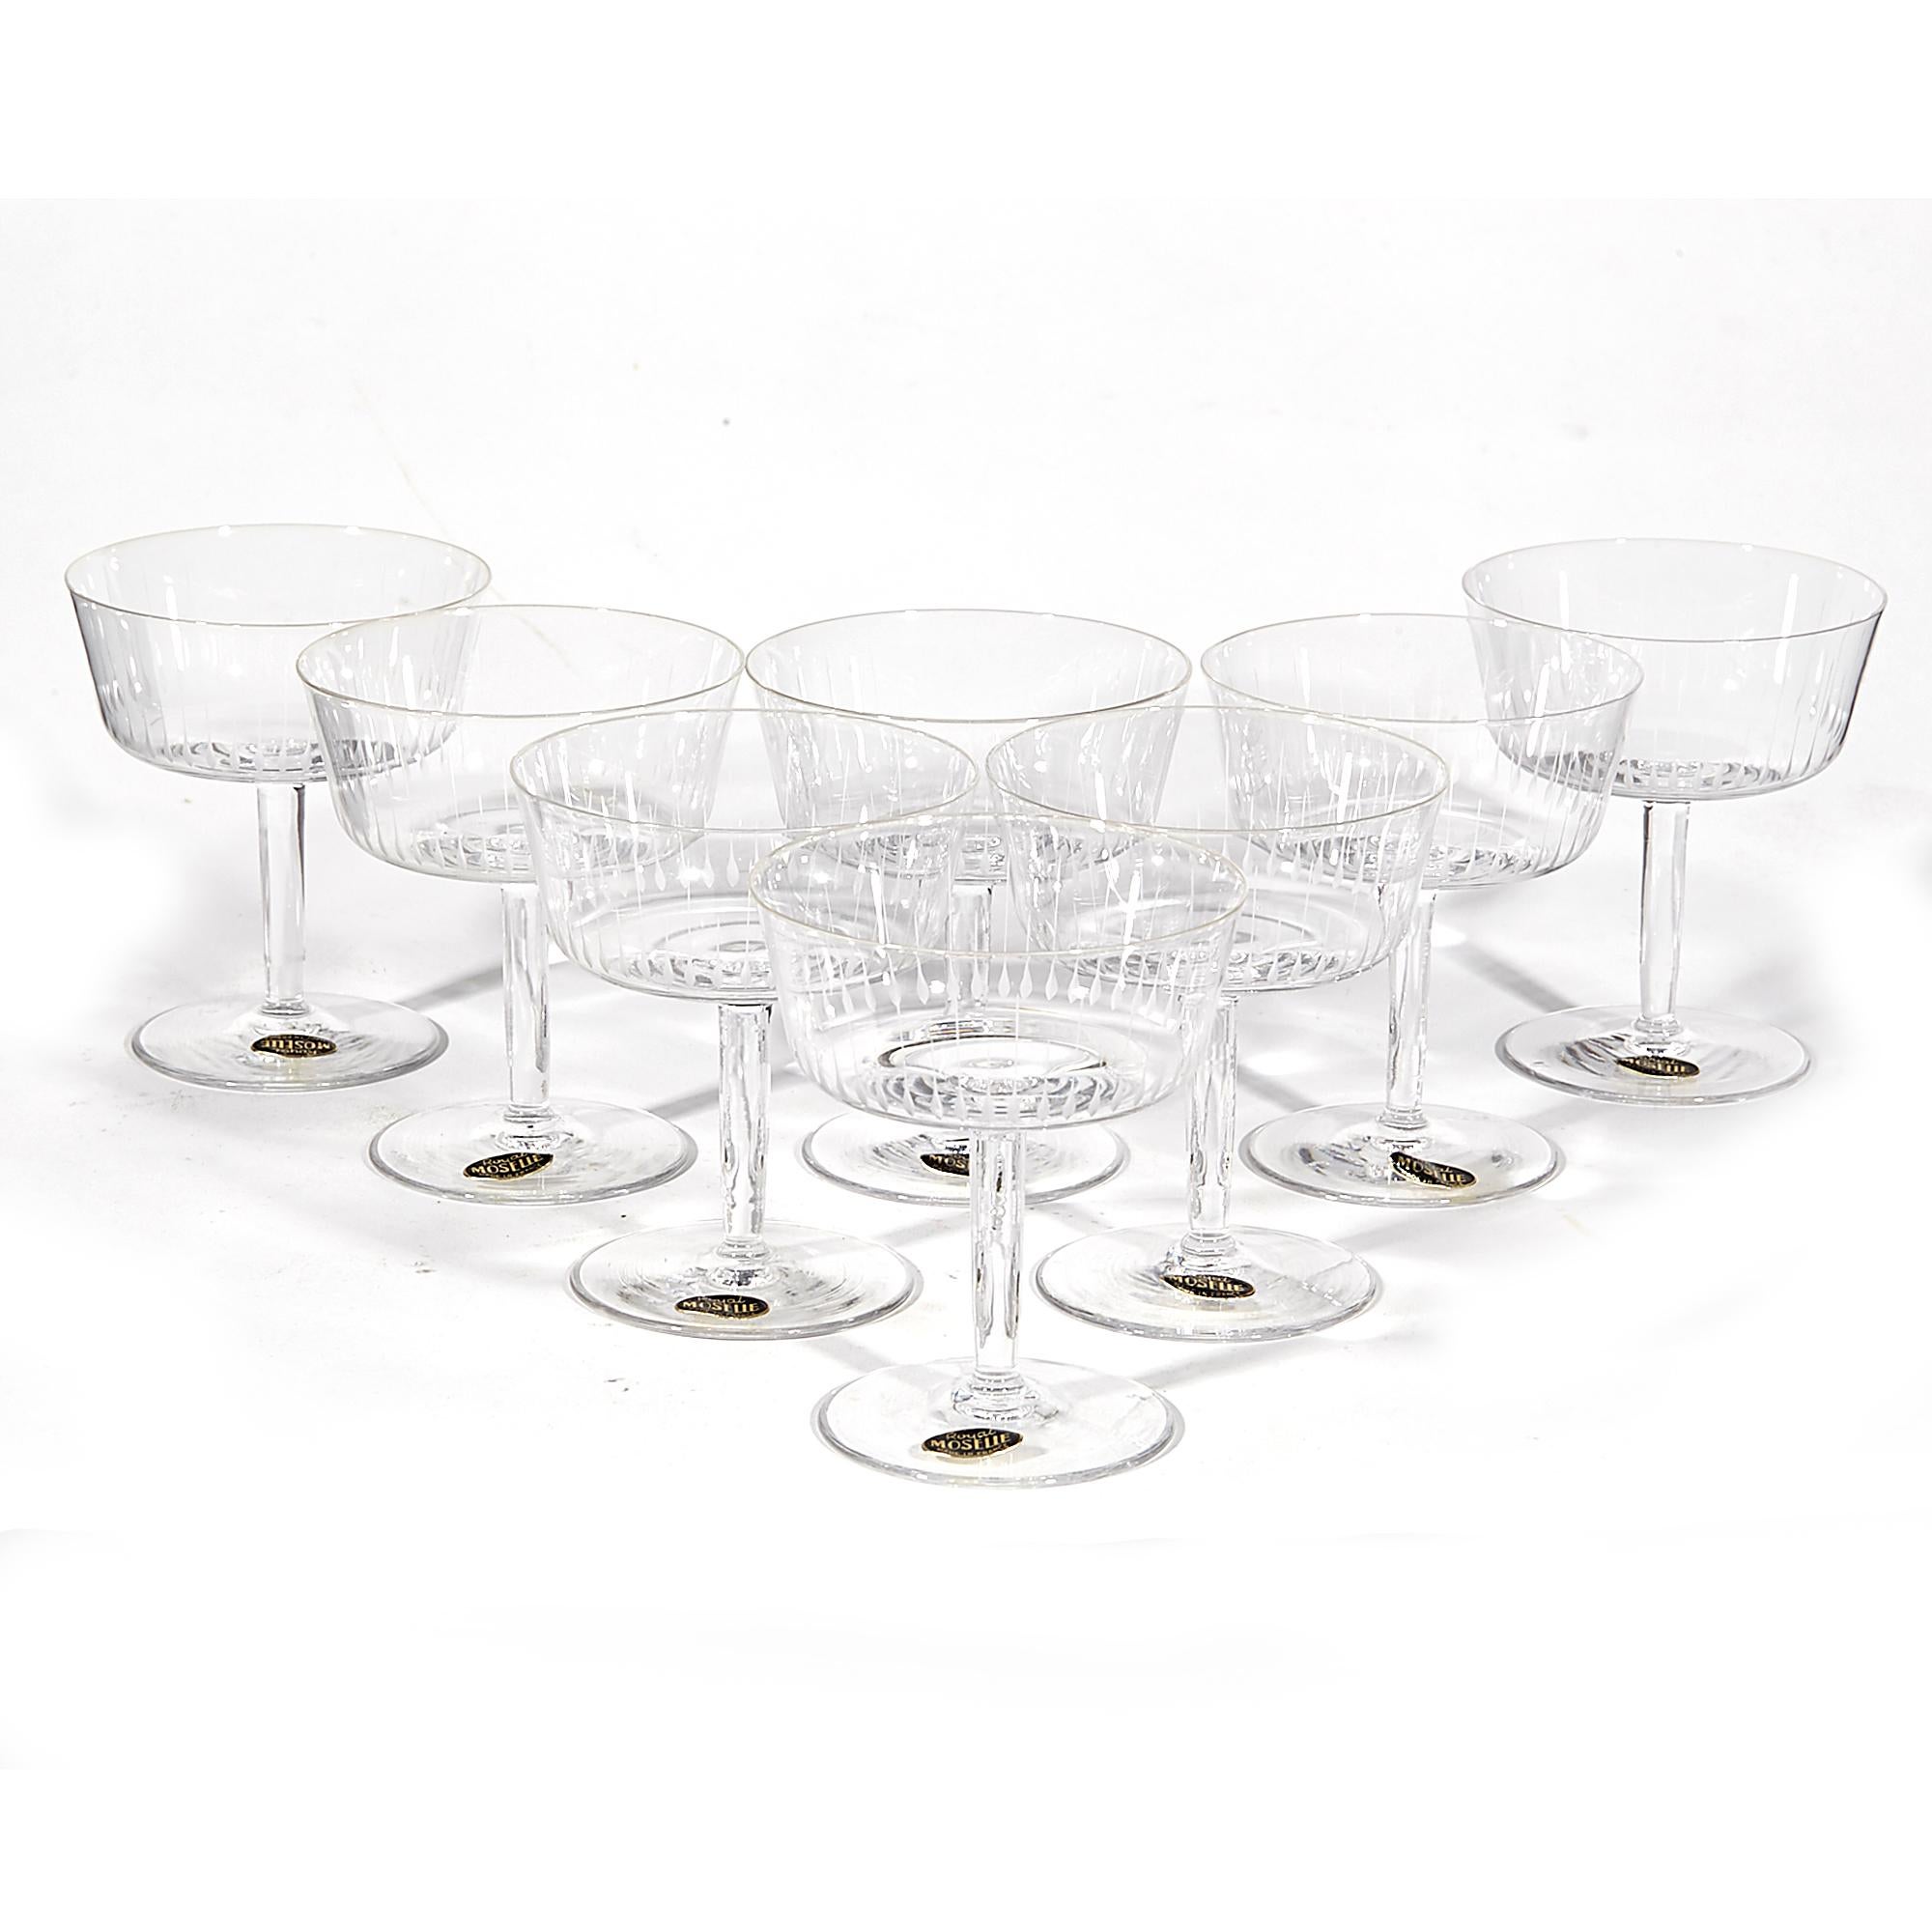 Vintage 1950s set of eight delicate French etched clear glass coupes. Marked: Royal Moselle.